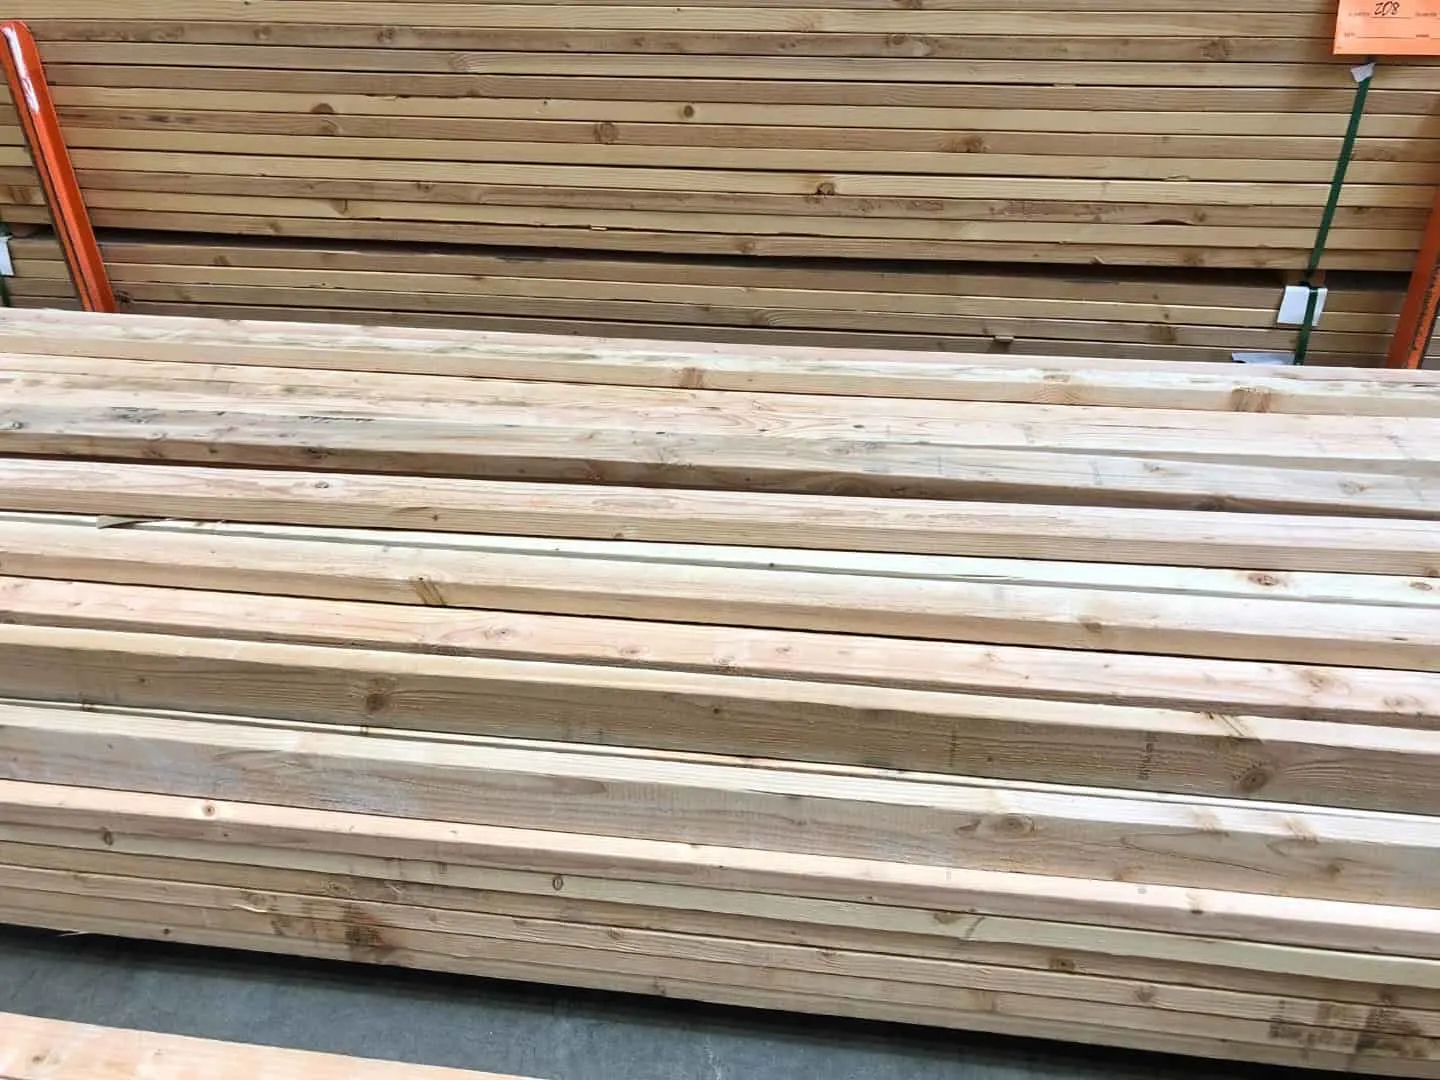 stack of 2x4 lumber at the home improvement store